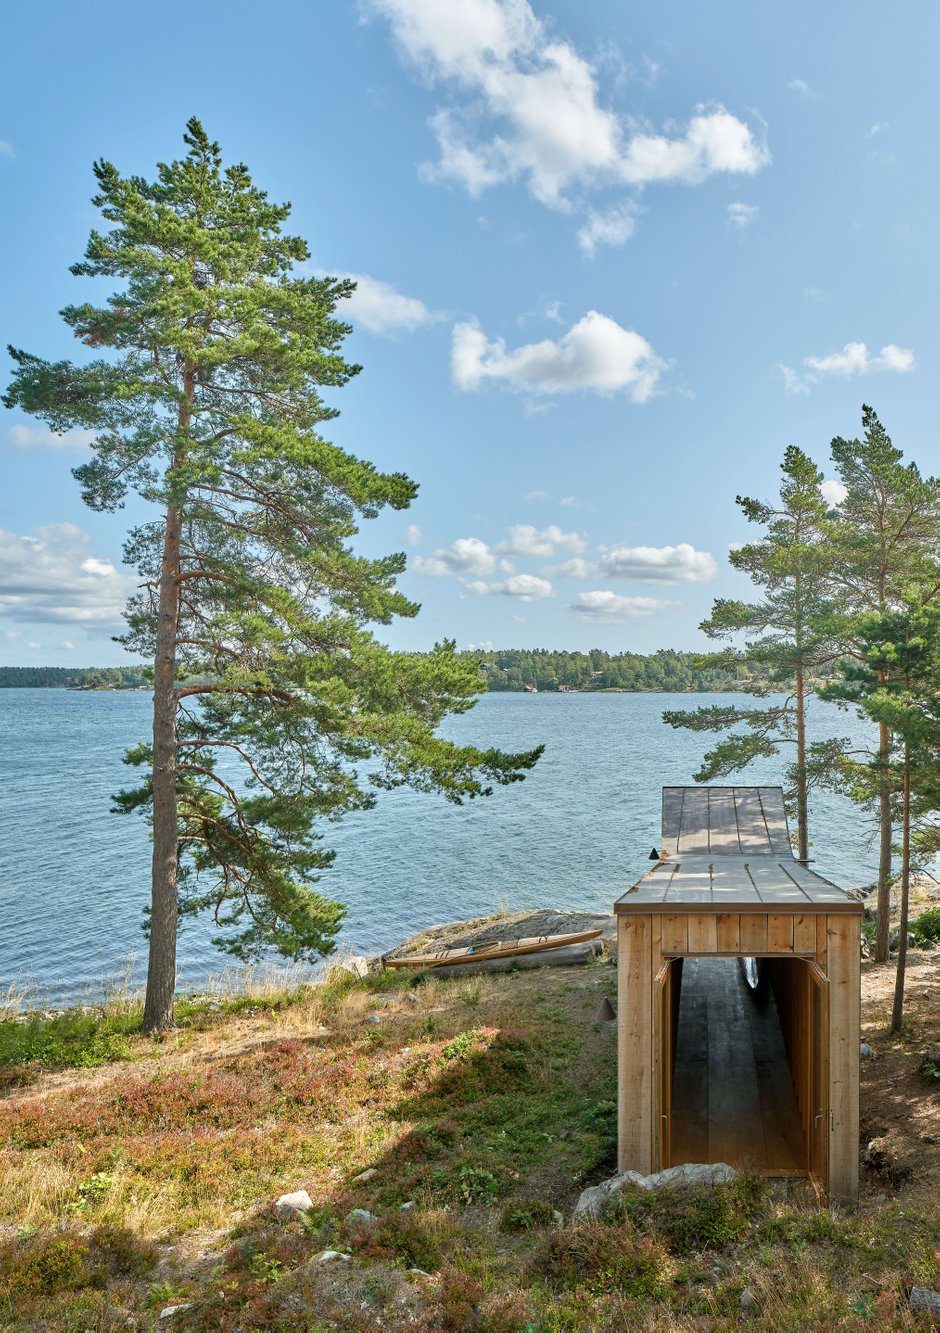 A view of the archipelago with the kayak house in the foreground